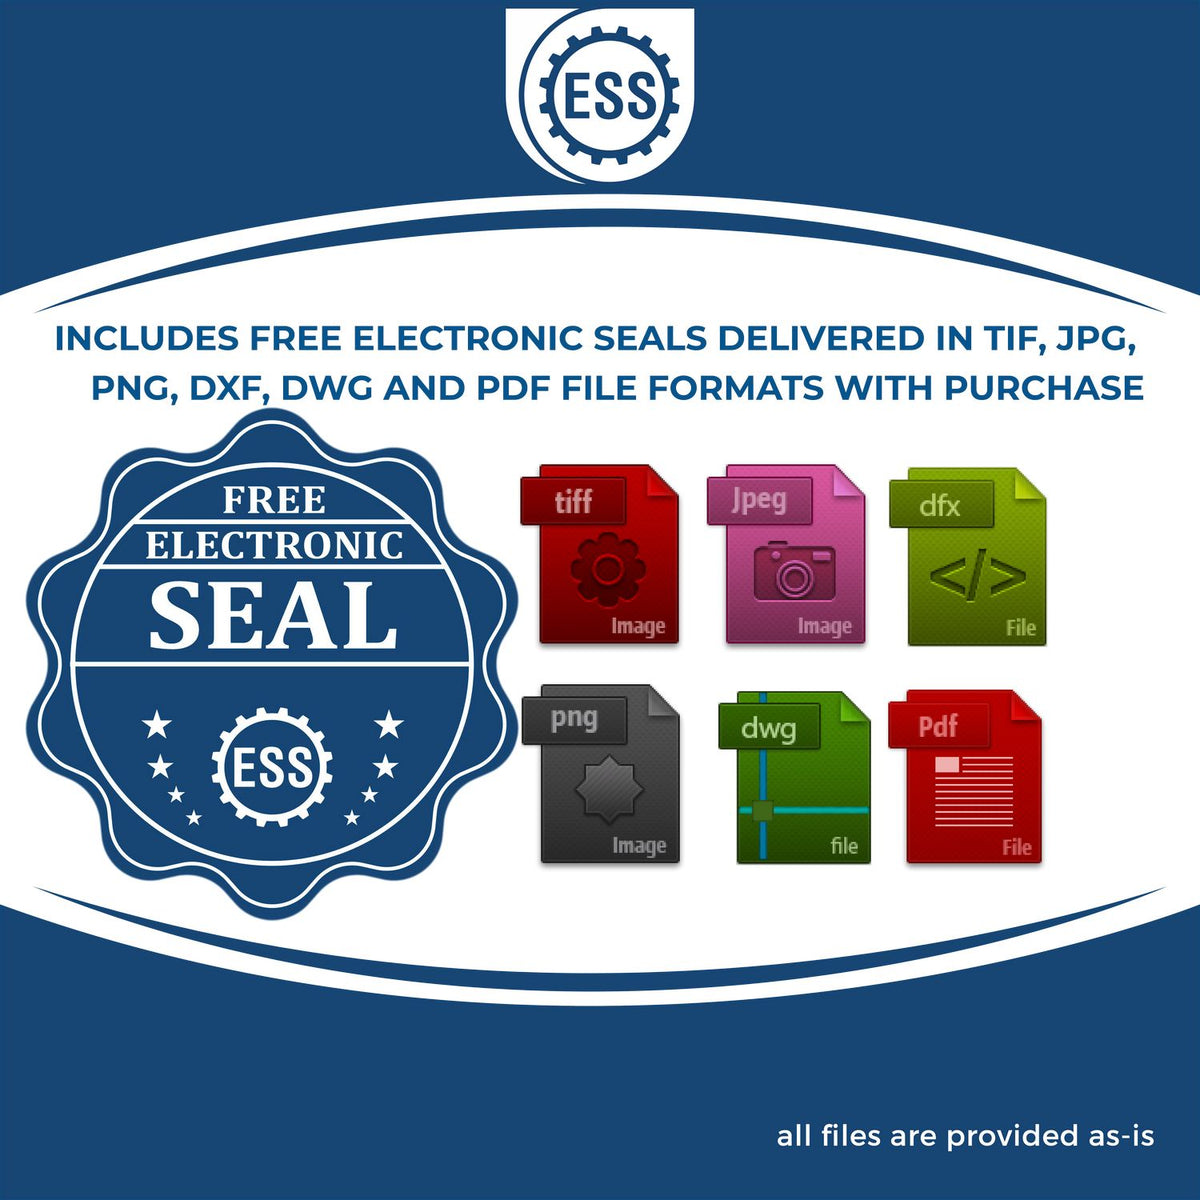 An infographic for the free electronic seal for the Heavy Duty Cast Iron Alaska Architect Embosser illustrating the different file type icons such as DXF, DWG, TIF, JPG and PNG.